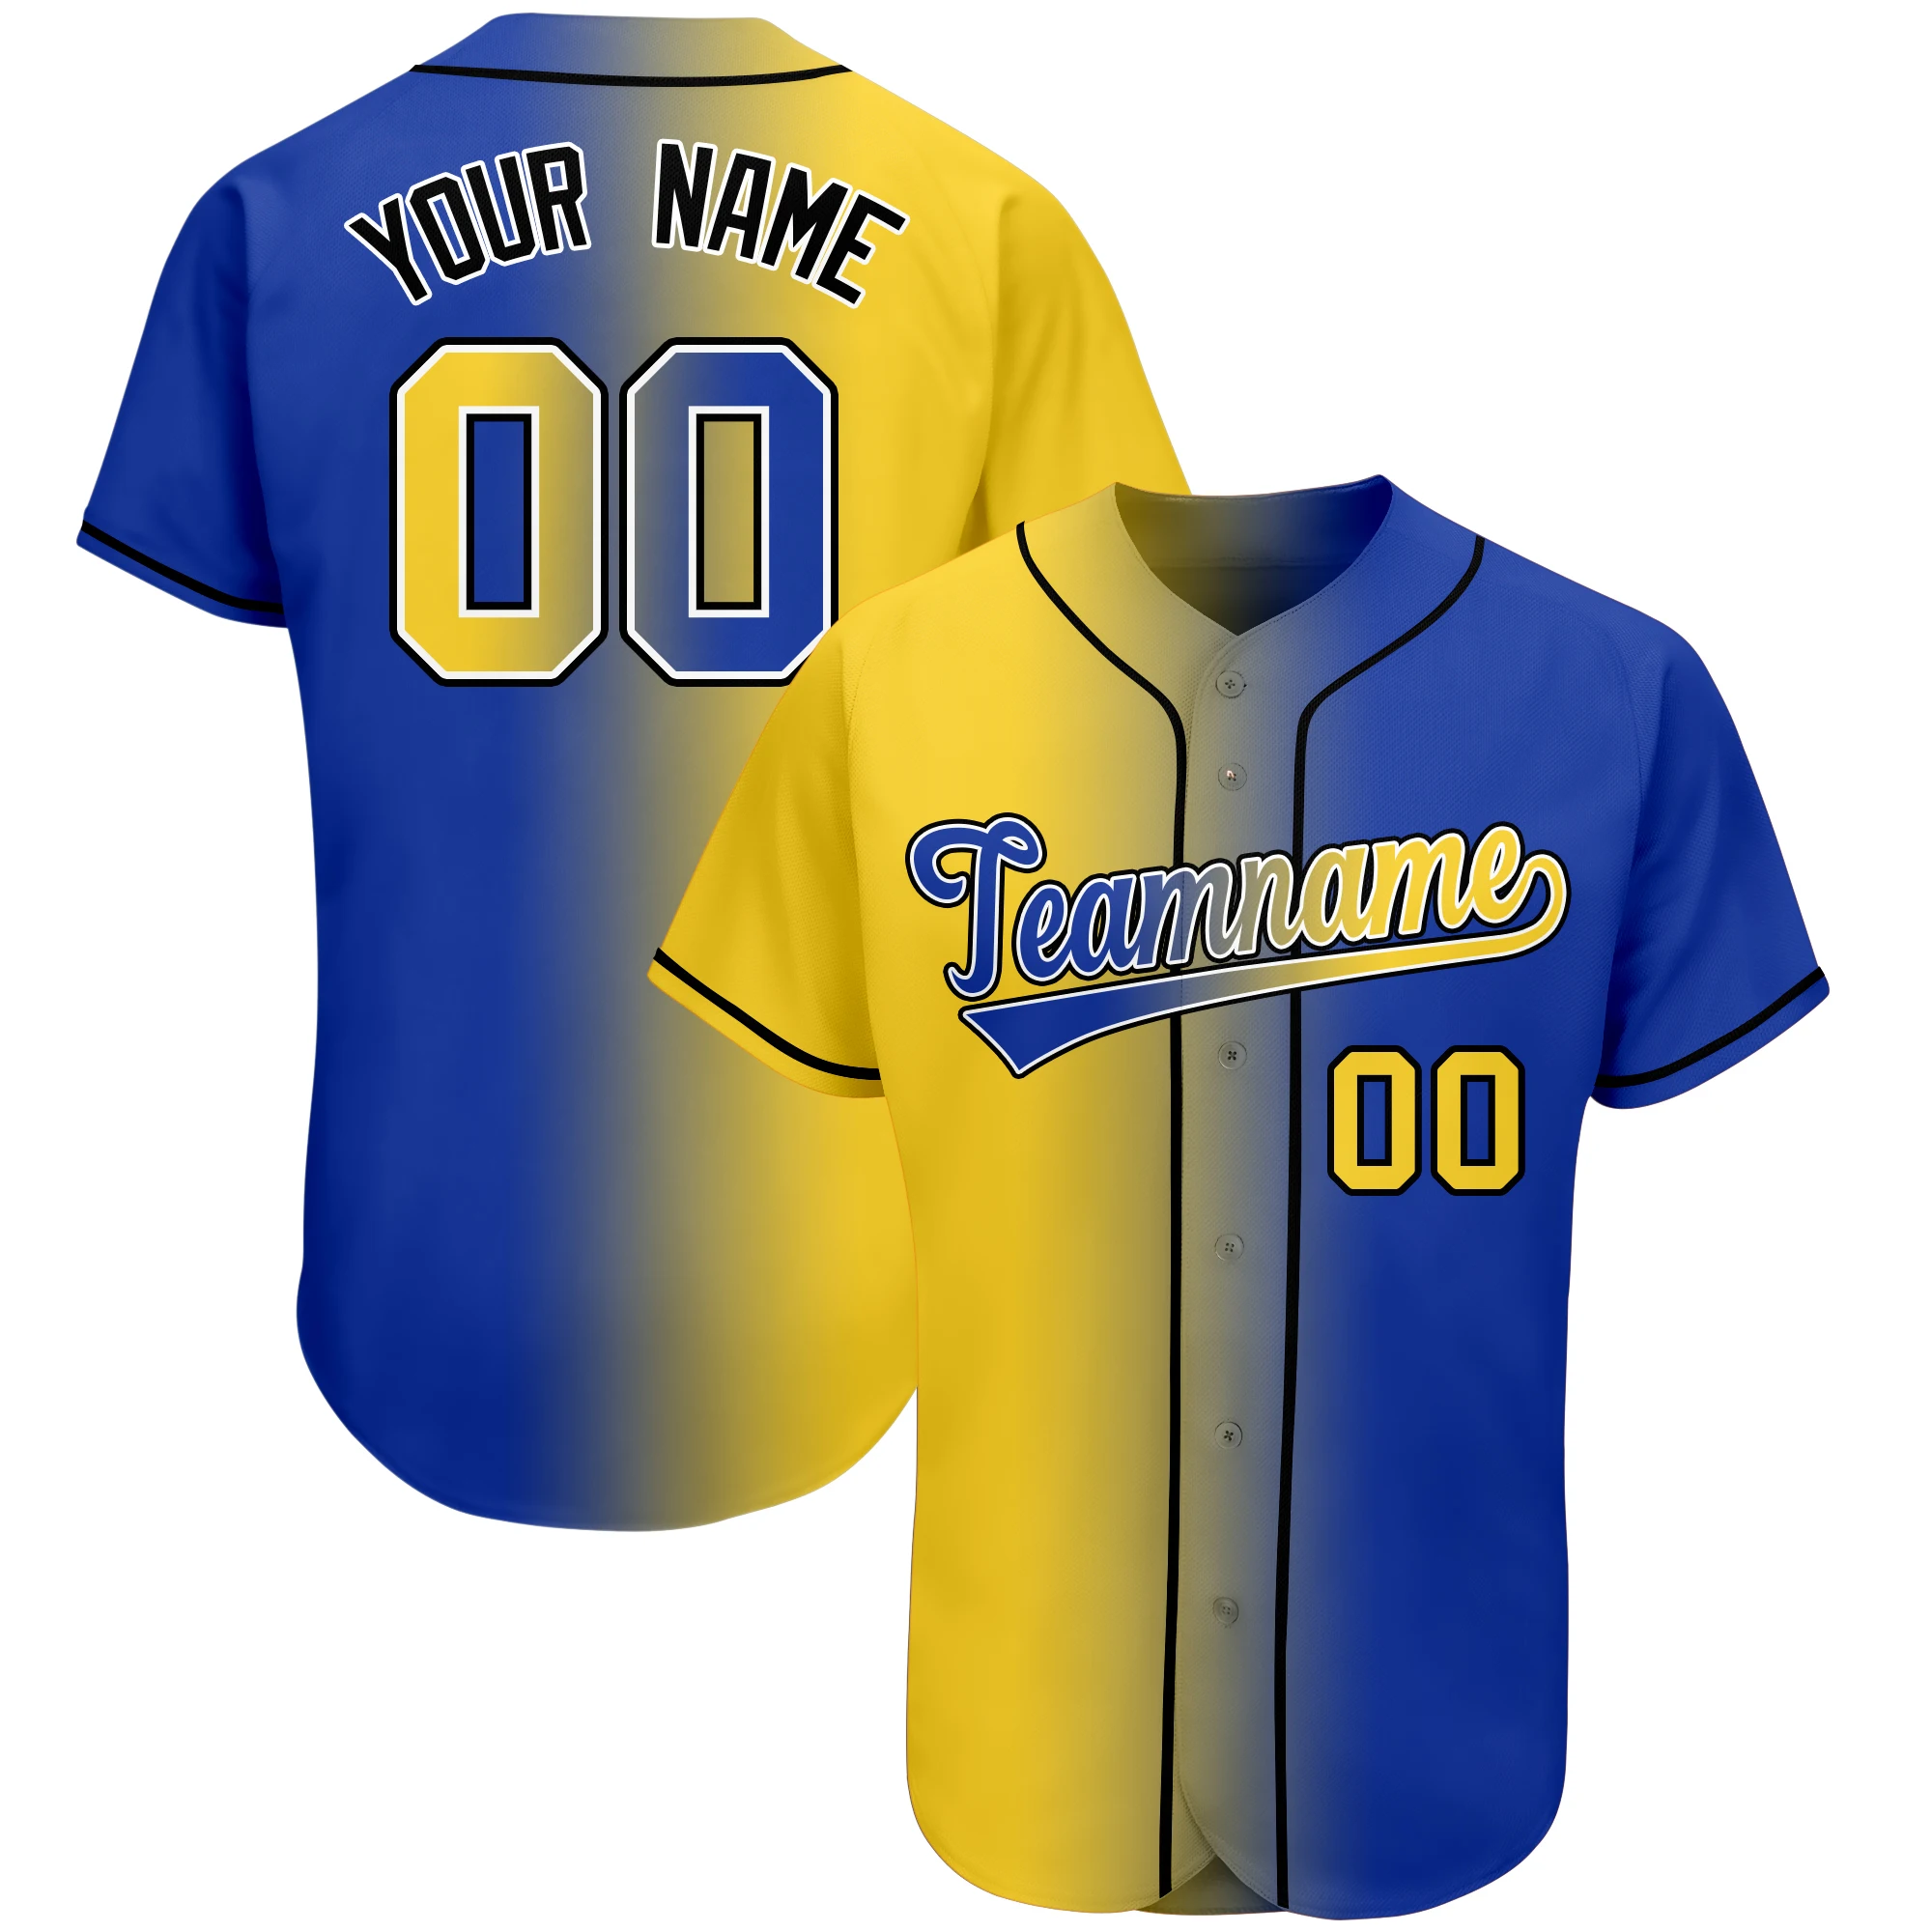 

Custom Stitched Baseball Jerseys Athlete's Uniforms Embroidered Shirts for Men/Kids Add Team Name Number